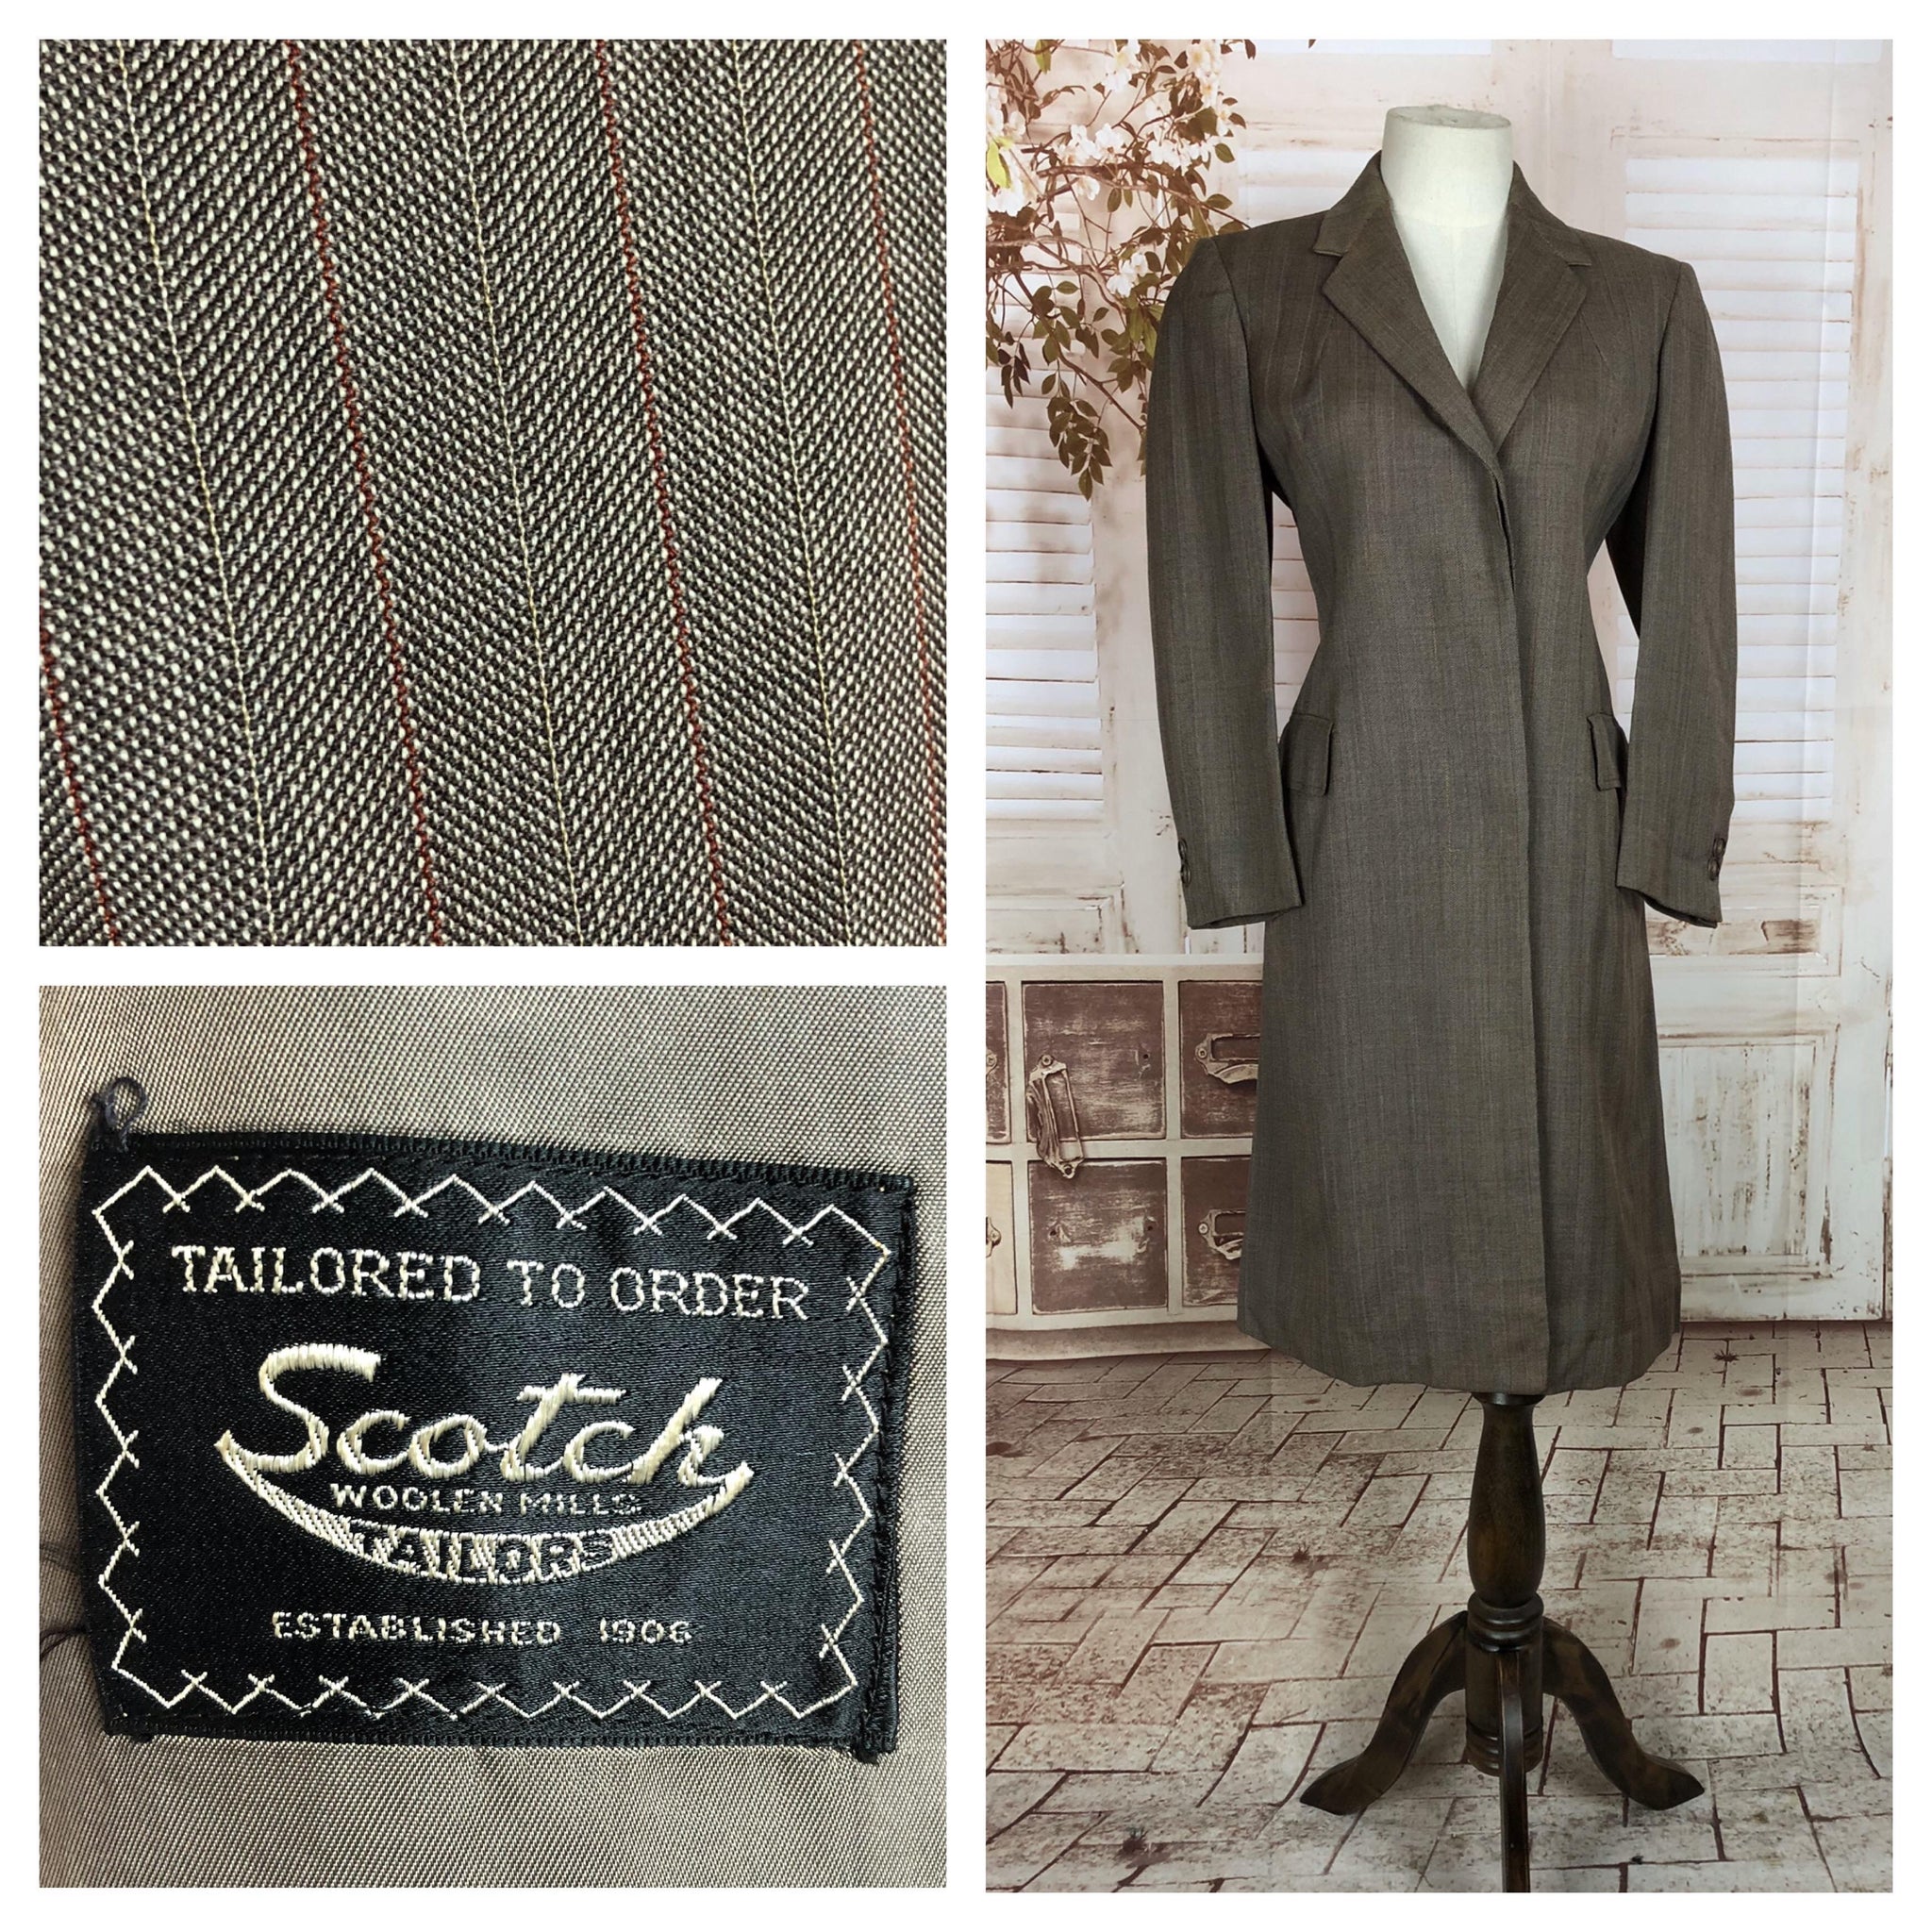 RESERVED FOR CHLOE - PLEASE DO NOT PURCHASE - Original Vintage 1940s 40s Grey Brown Lightweight Wool With Red Stripes Coat